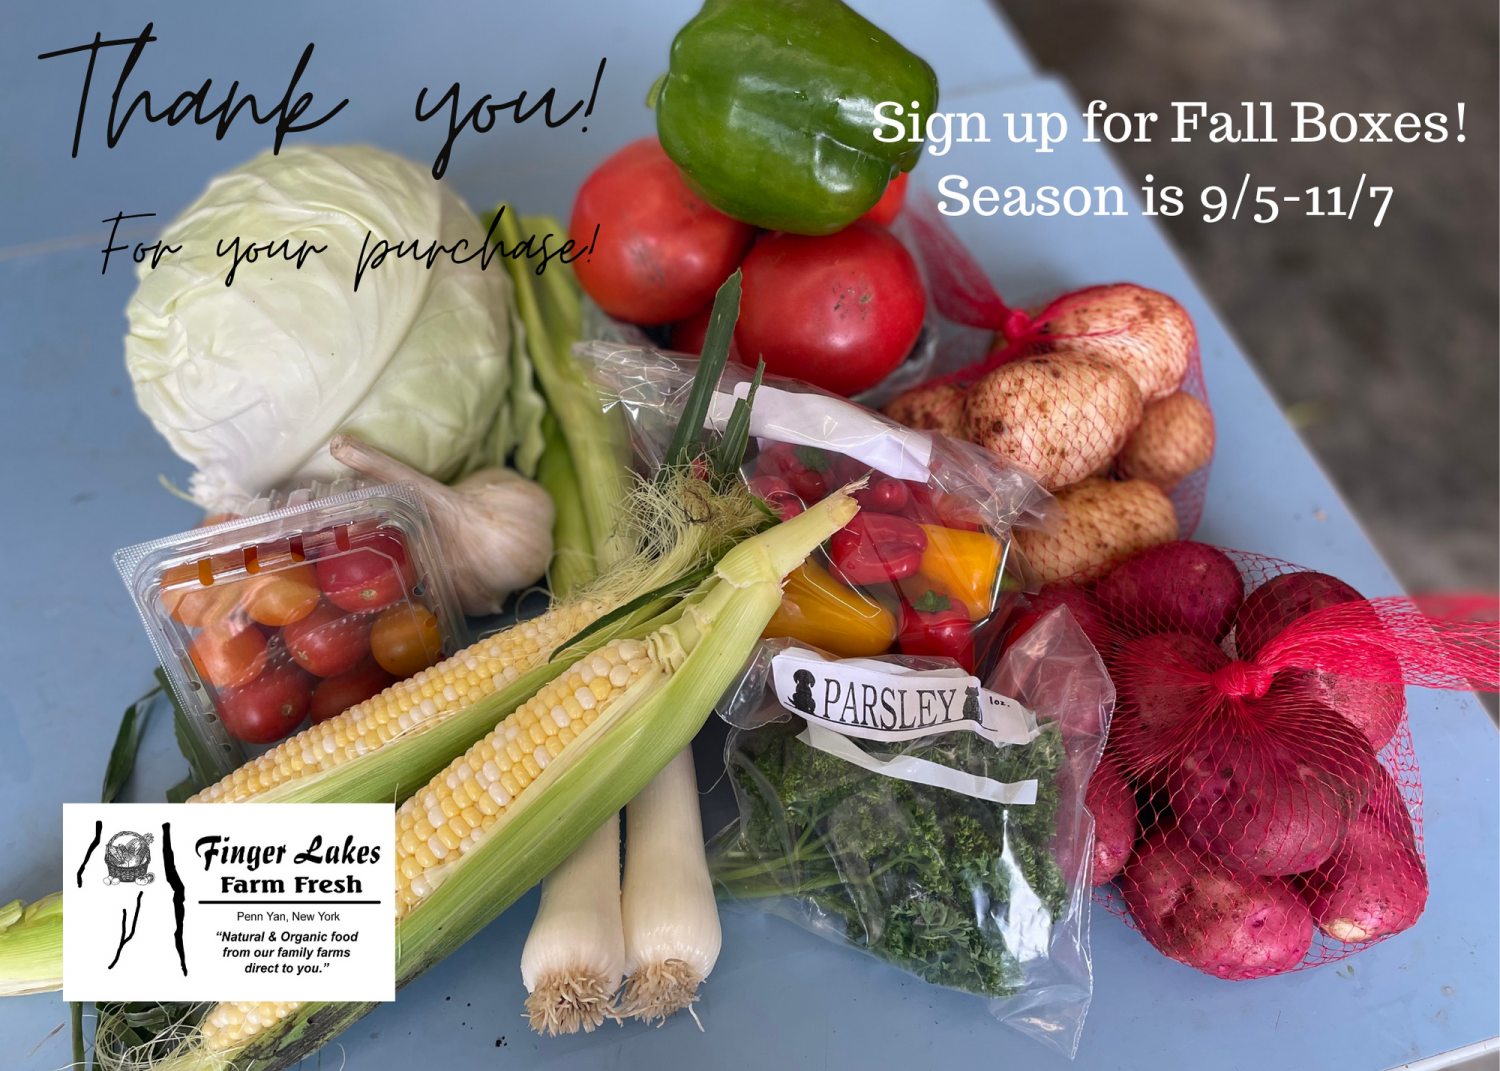 Next Happening: Fall is in the air!  Are you signed up to keep getting Veggies!?